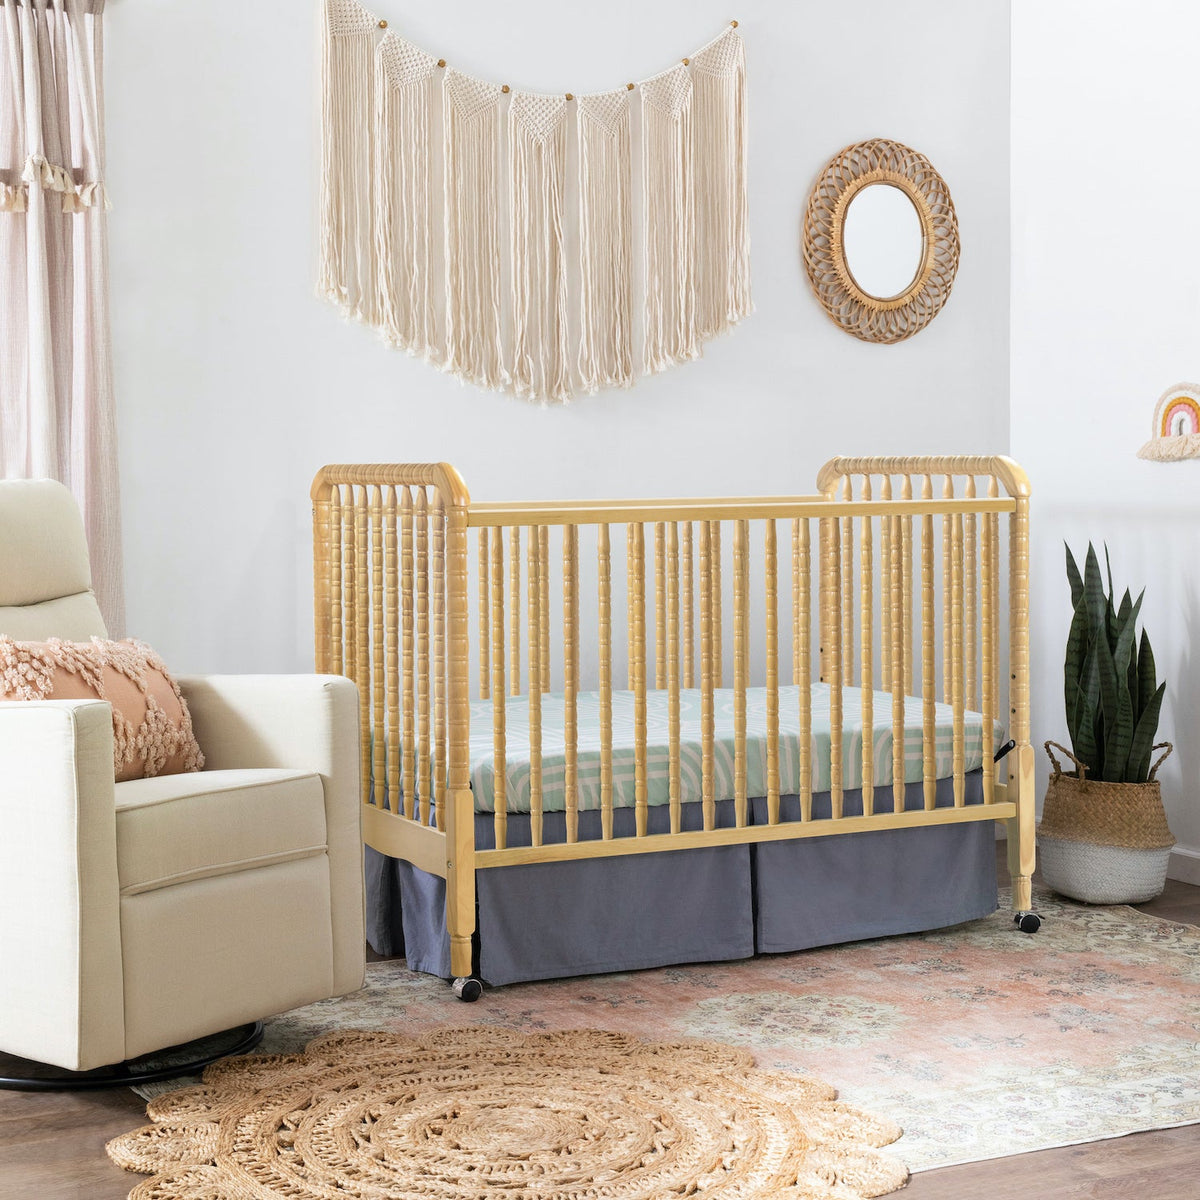 Exploring the Davinci Jenny Lind Crib for Your Baby’s Nursery插图4